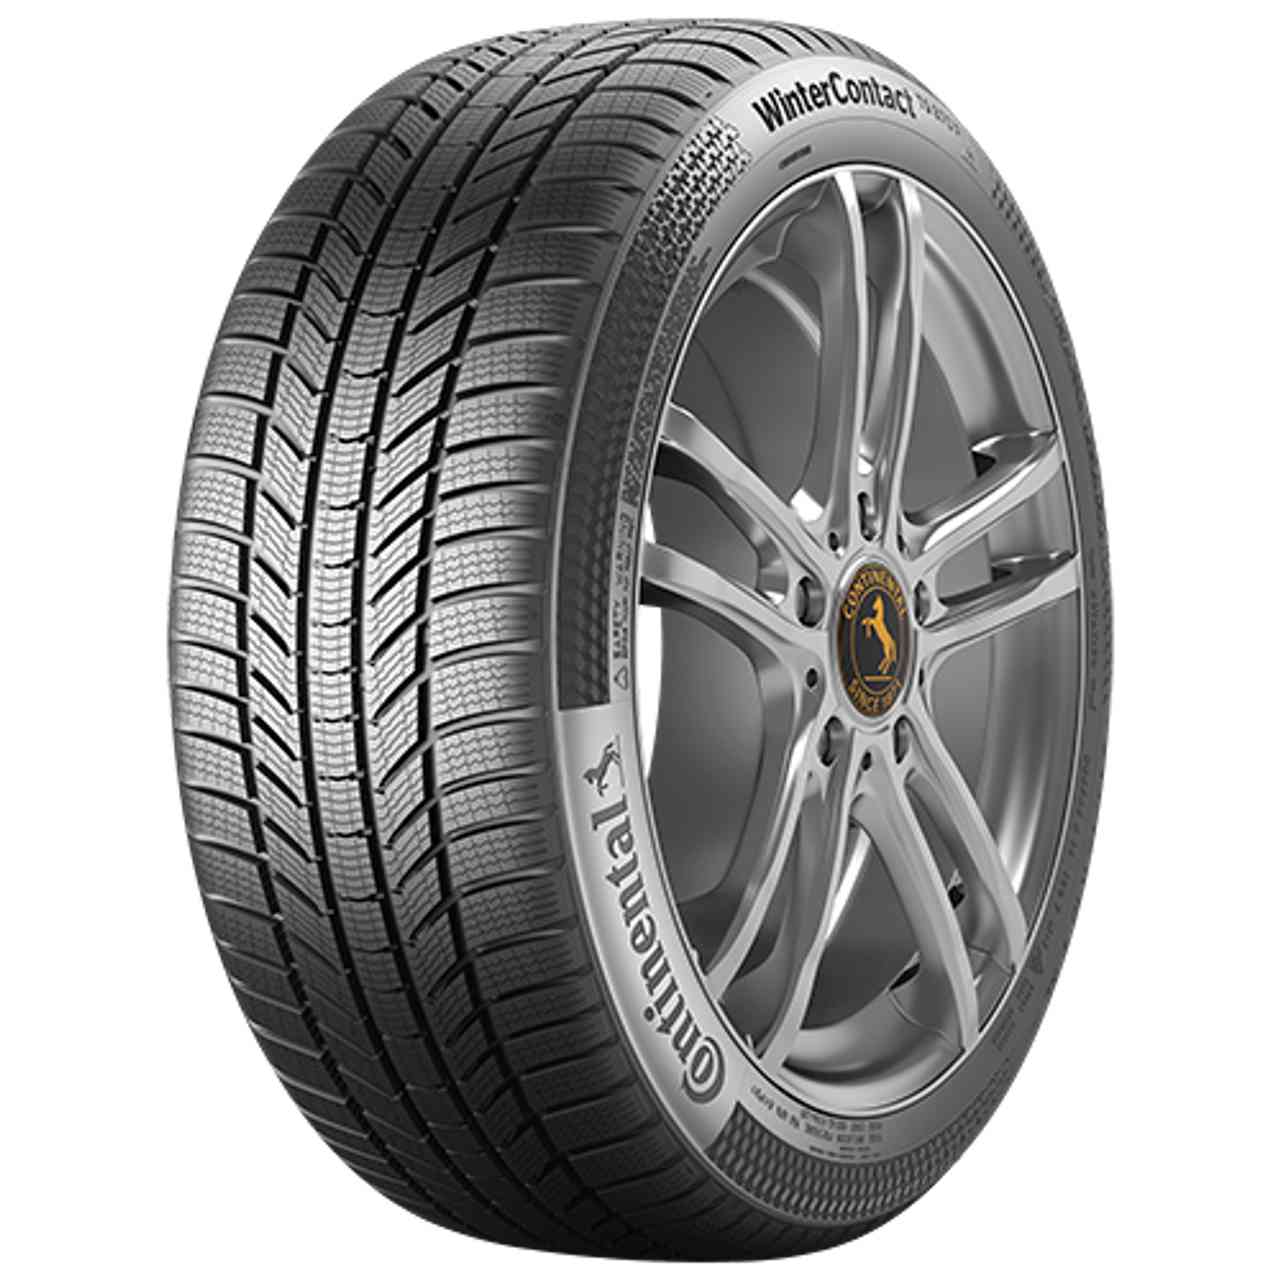 CONTINENTAL WINTERCONTACT TS 870 P (EVc) 235/55R17 99H BSW